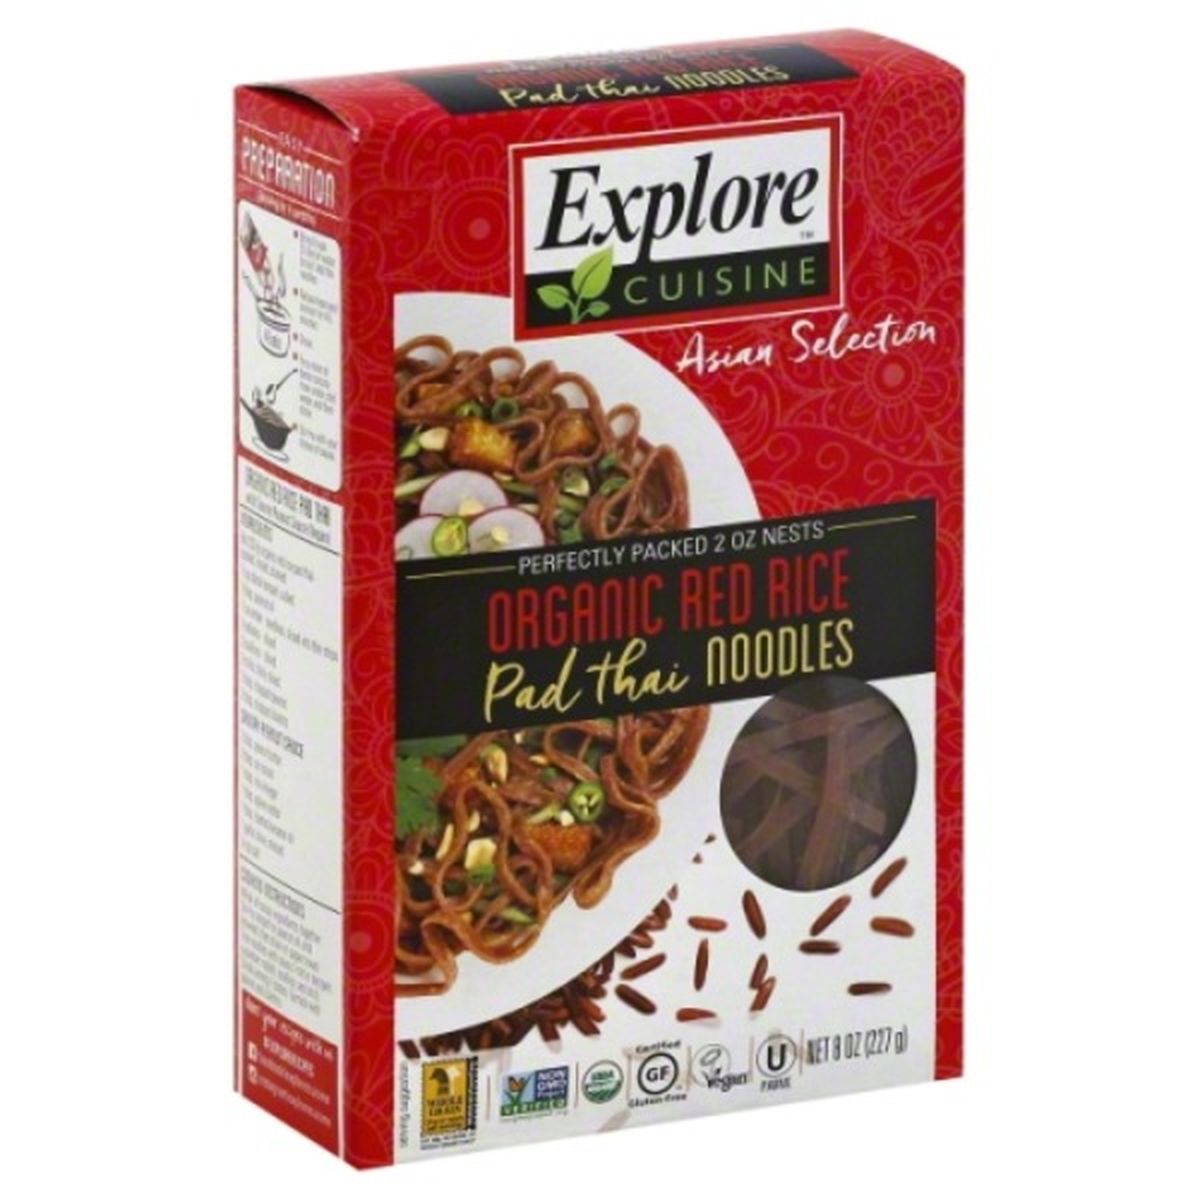 Calories in Explore Cuisine Asian Selection Noodles, Pad Thai, Organic, Red Rice